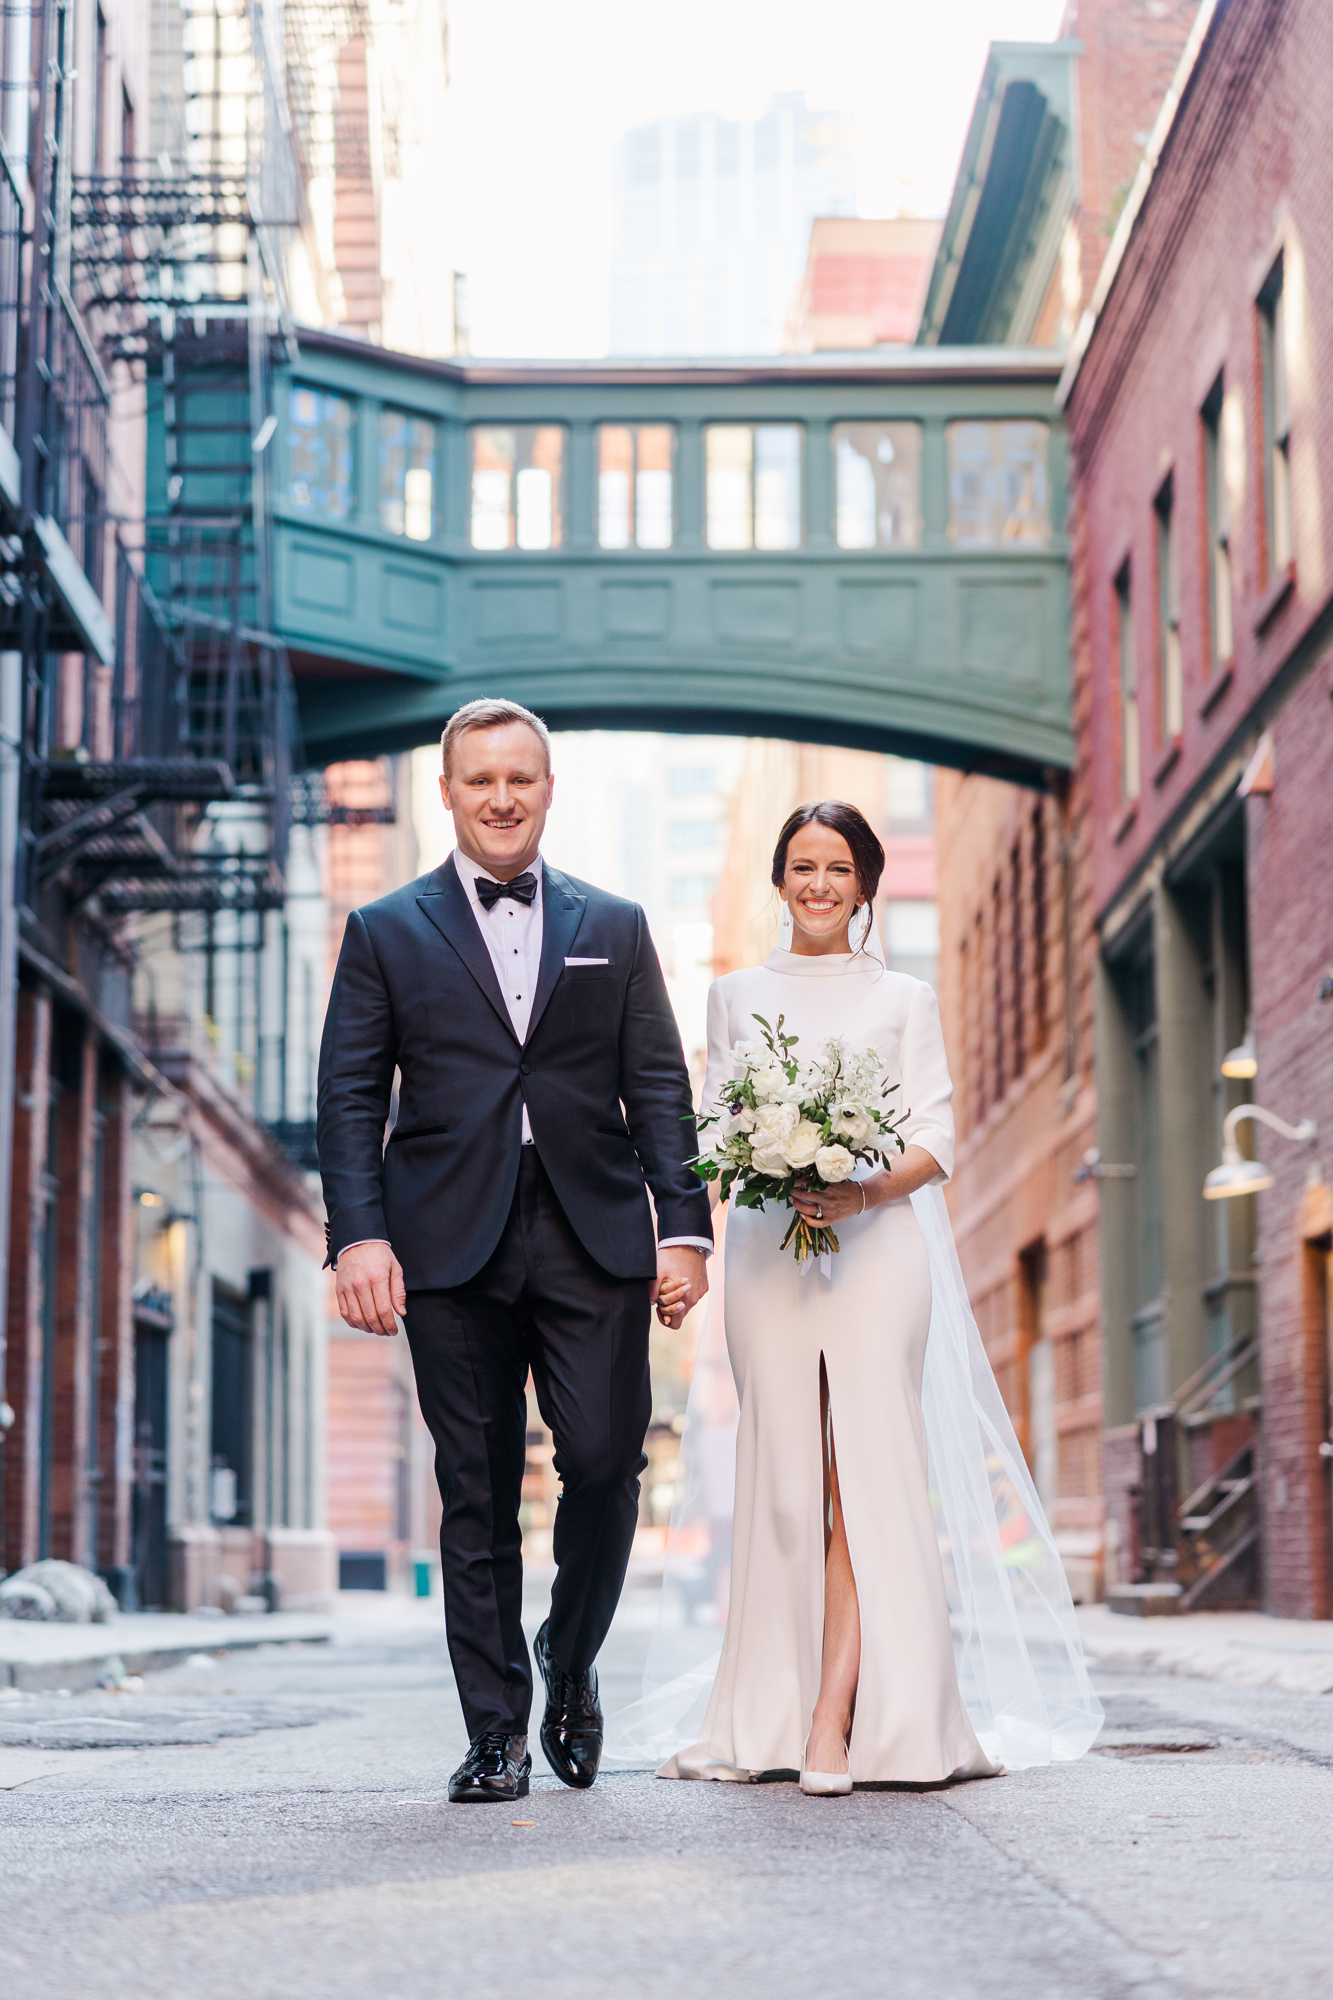 Chilly Wedding at St. Francis Xavier in NYC